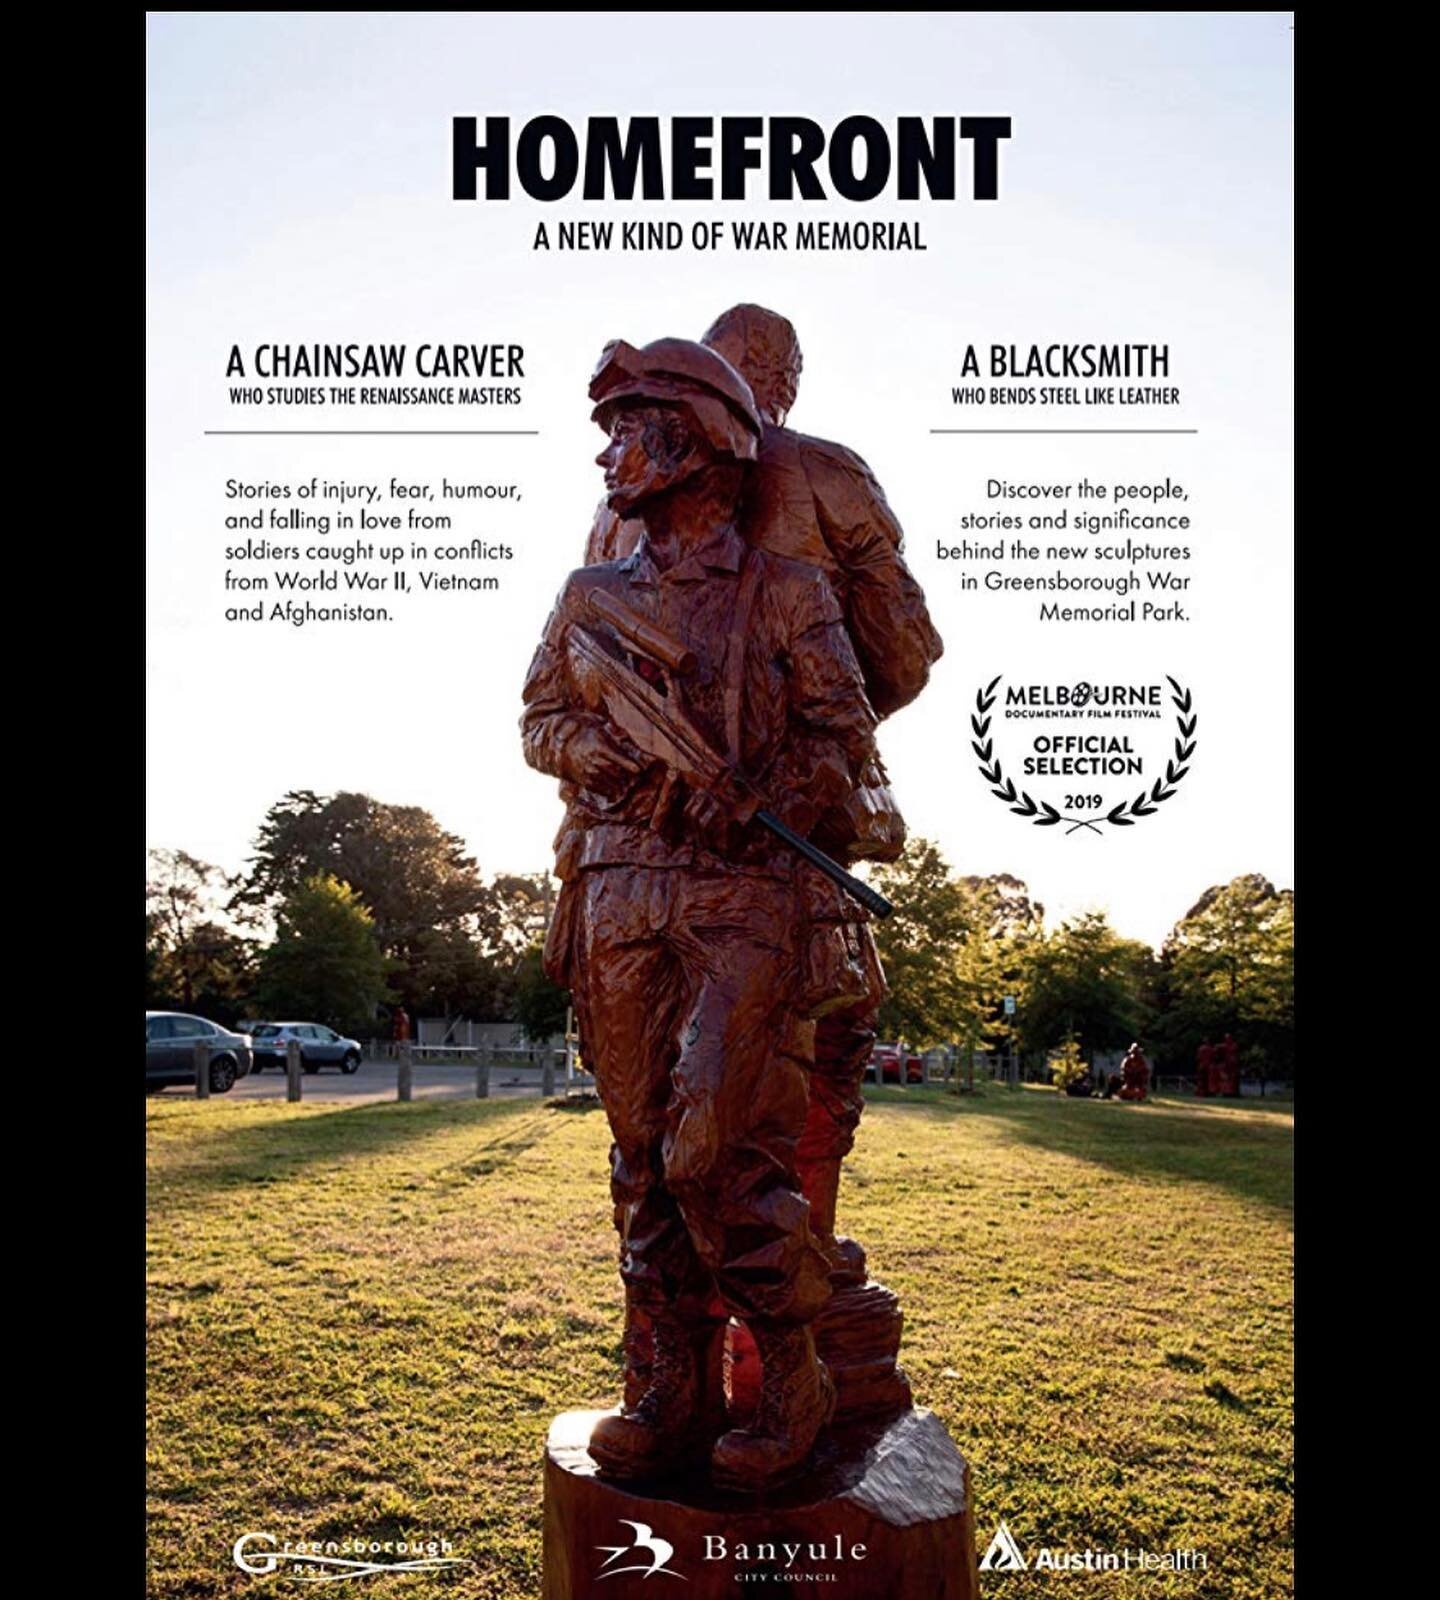 I was extremely fortunate to be involved in a documentary that screened on SBS last night called &lsquo;Homefront: A new kind of war memorial&rsquo;. I am so grateful for being asked to be involved in this project, speaking about aspects of my life t